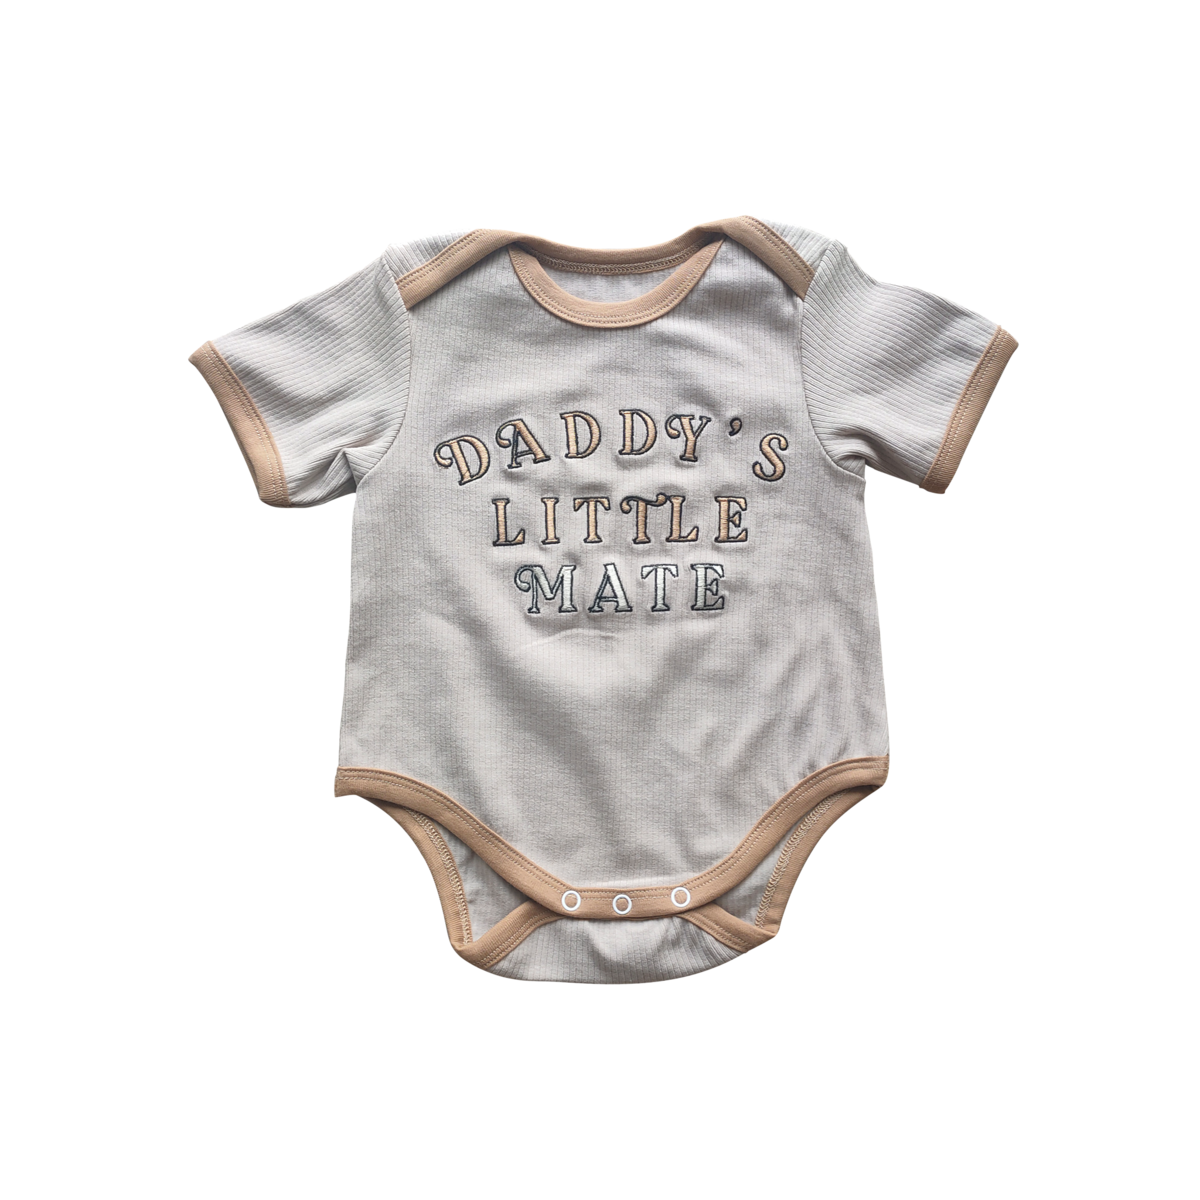 Daddy's Little Mate 5 Tee only!